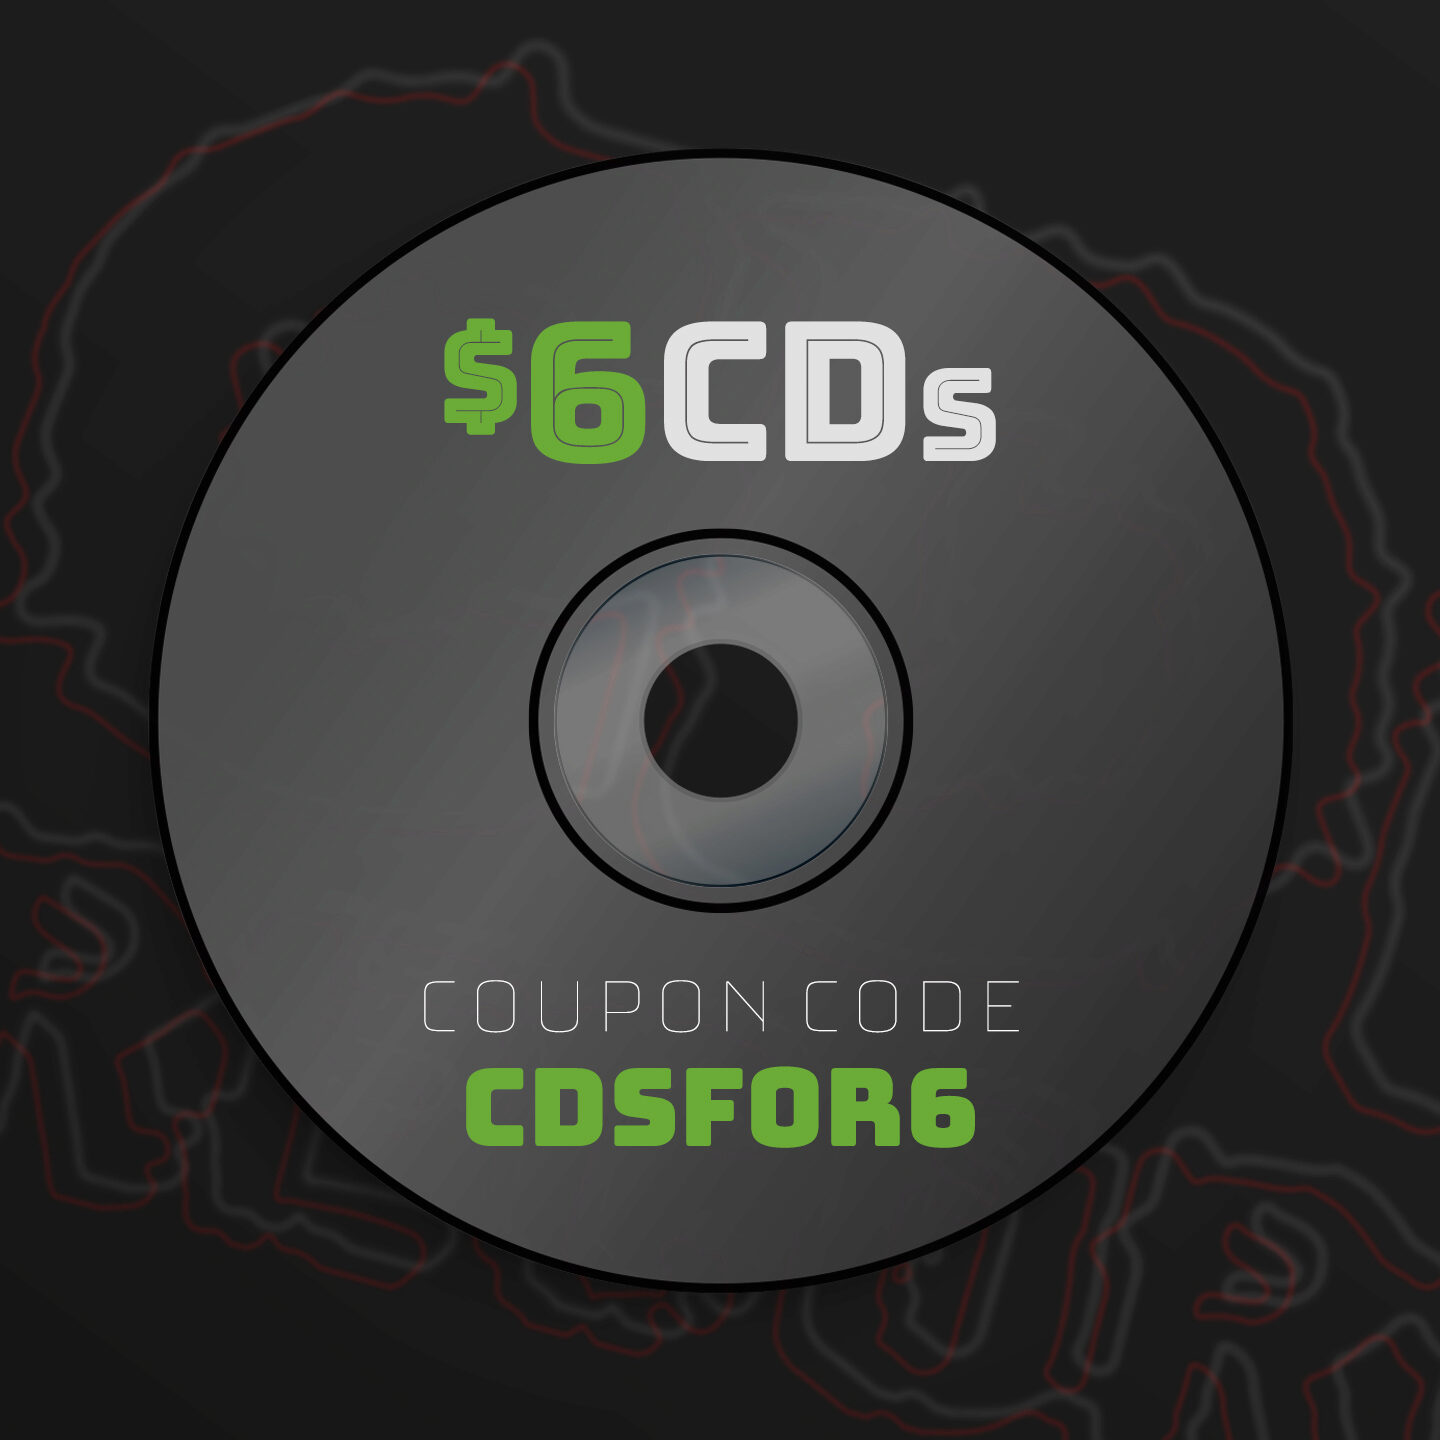 Promo graphic for the CDSFOR6 code